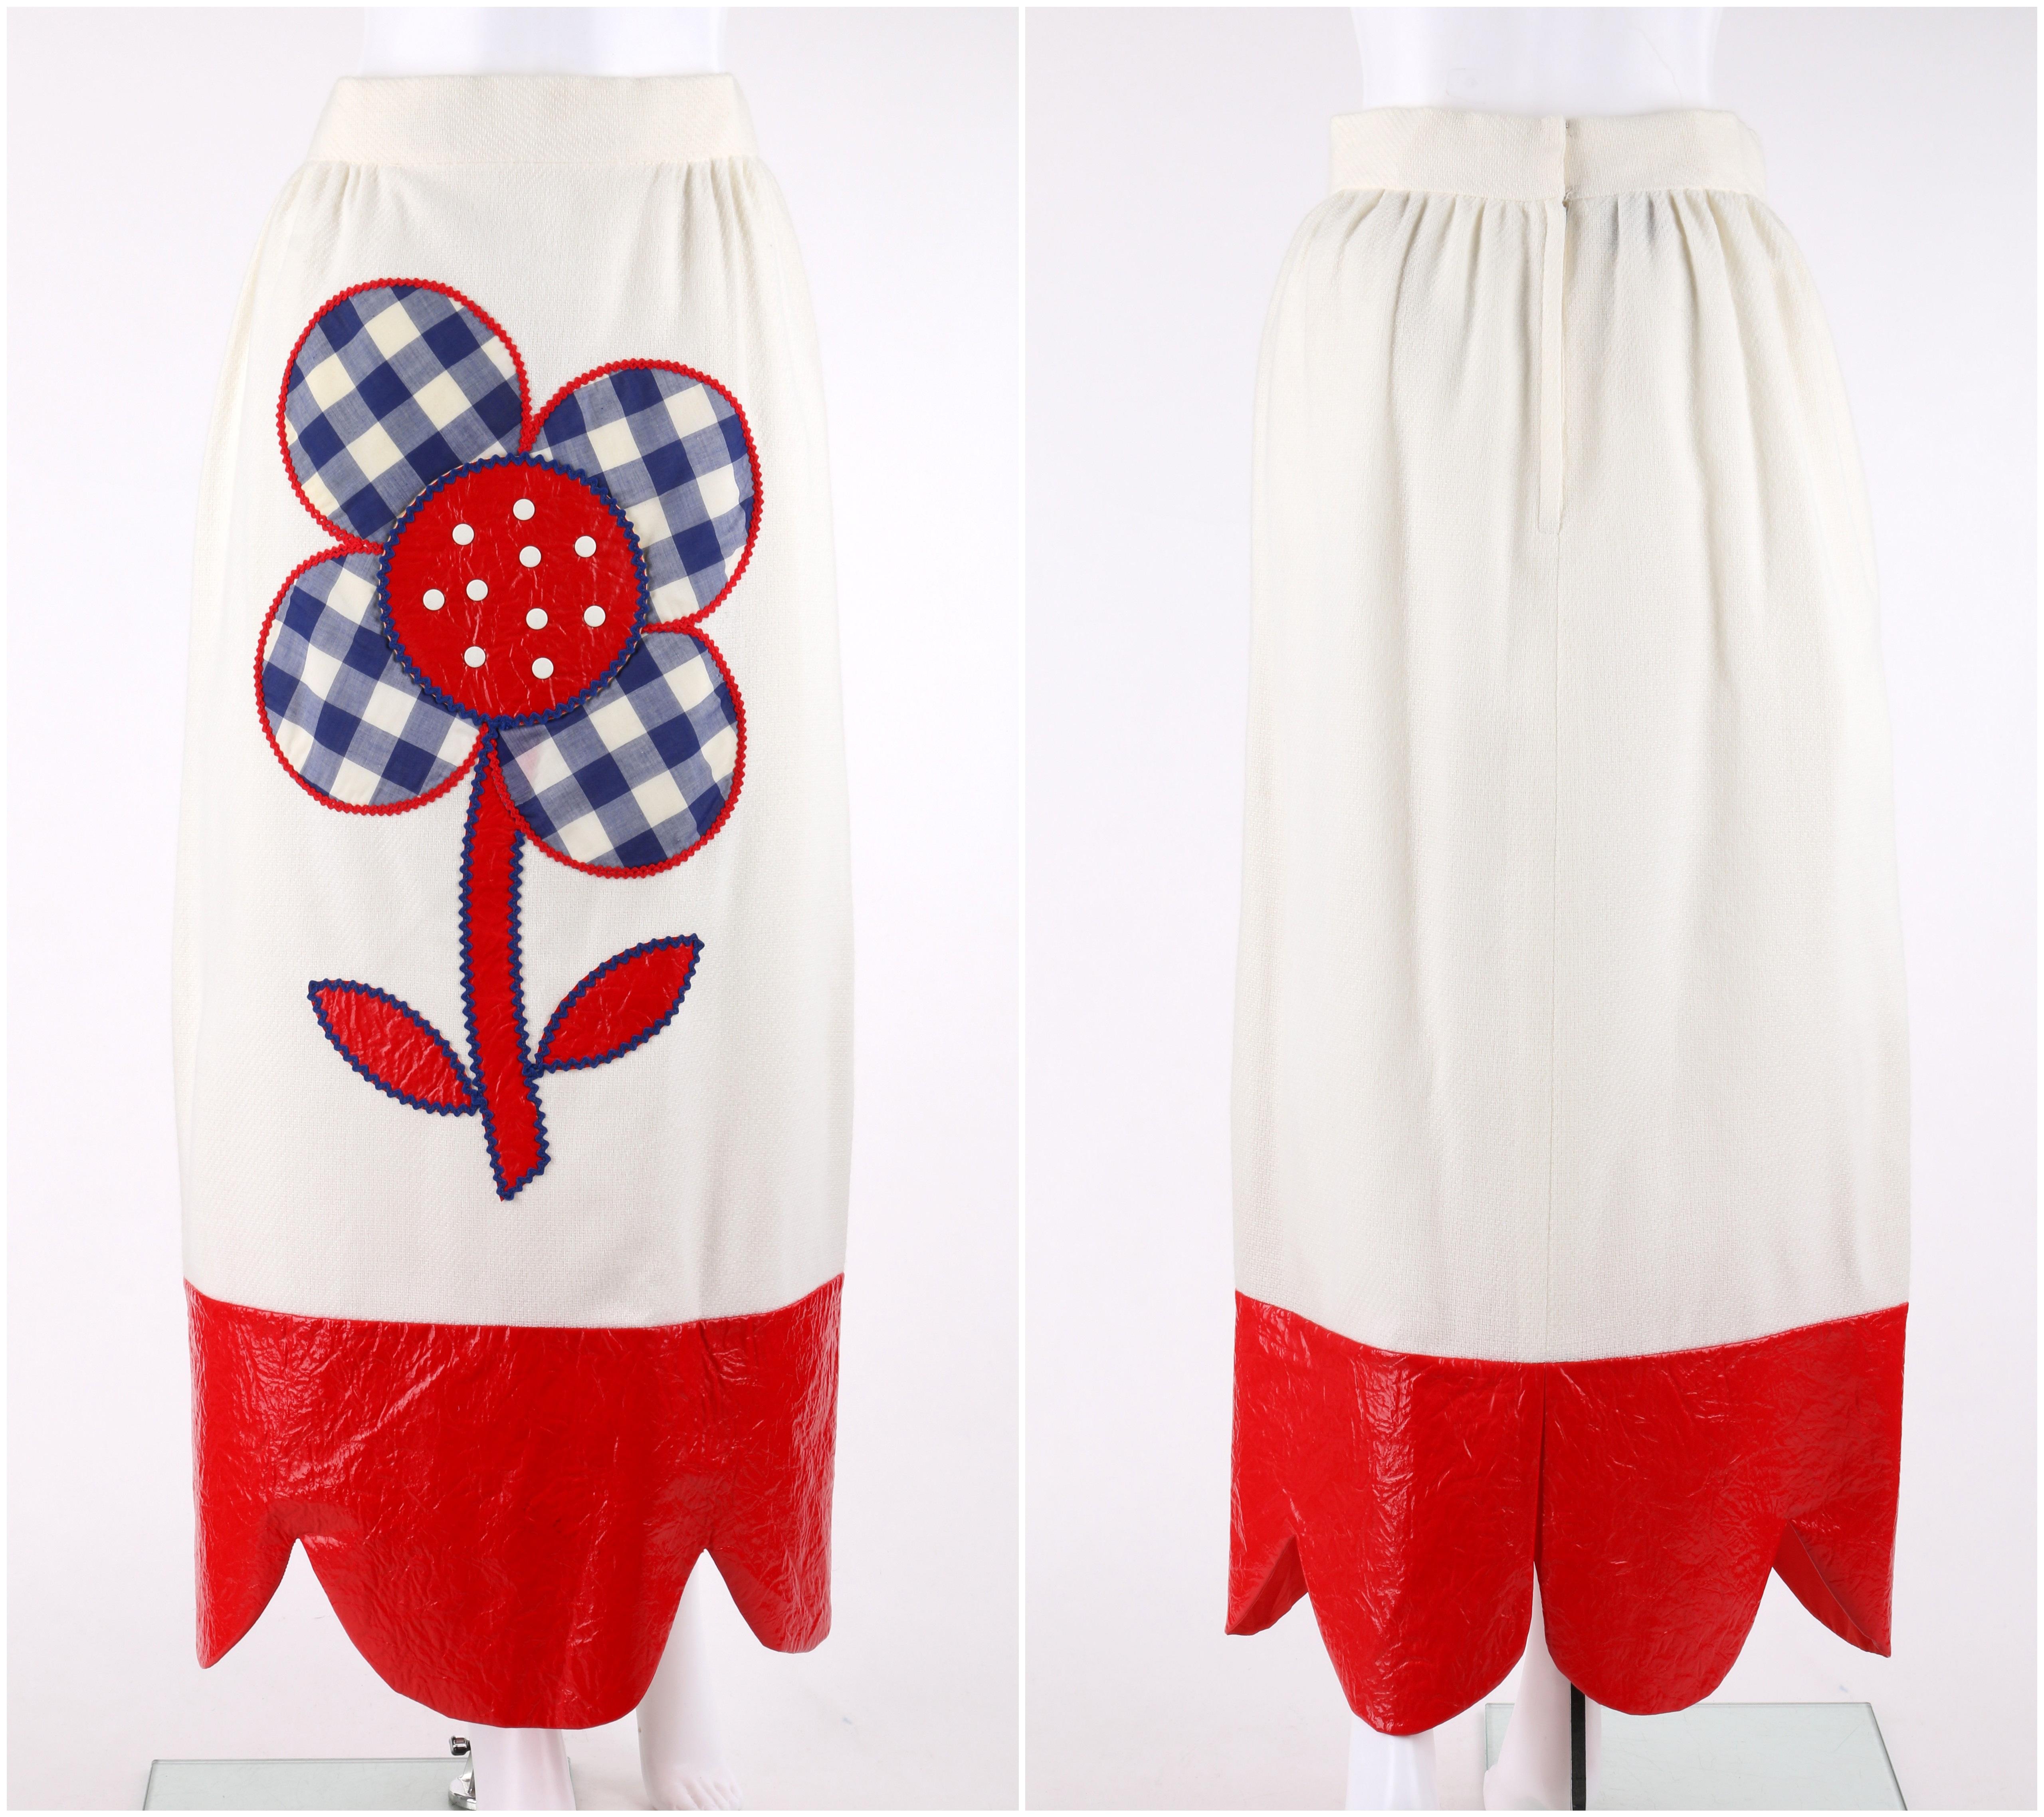 Women's PATCHES ST LOUIS c.1970’s 3 Pc Red White Blue Gingham Floral Top Skirt Belt Set For Sale